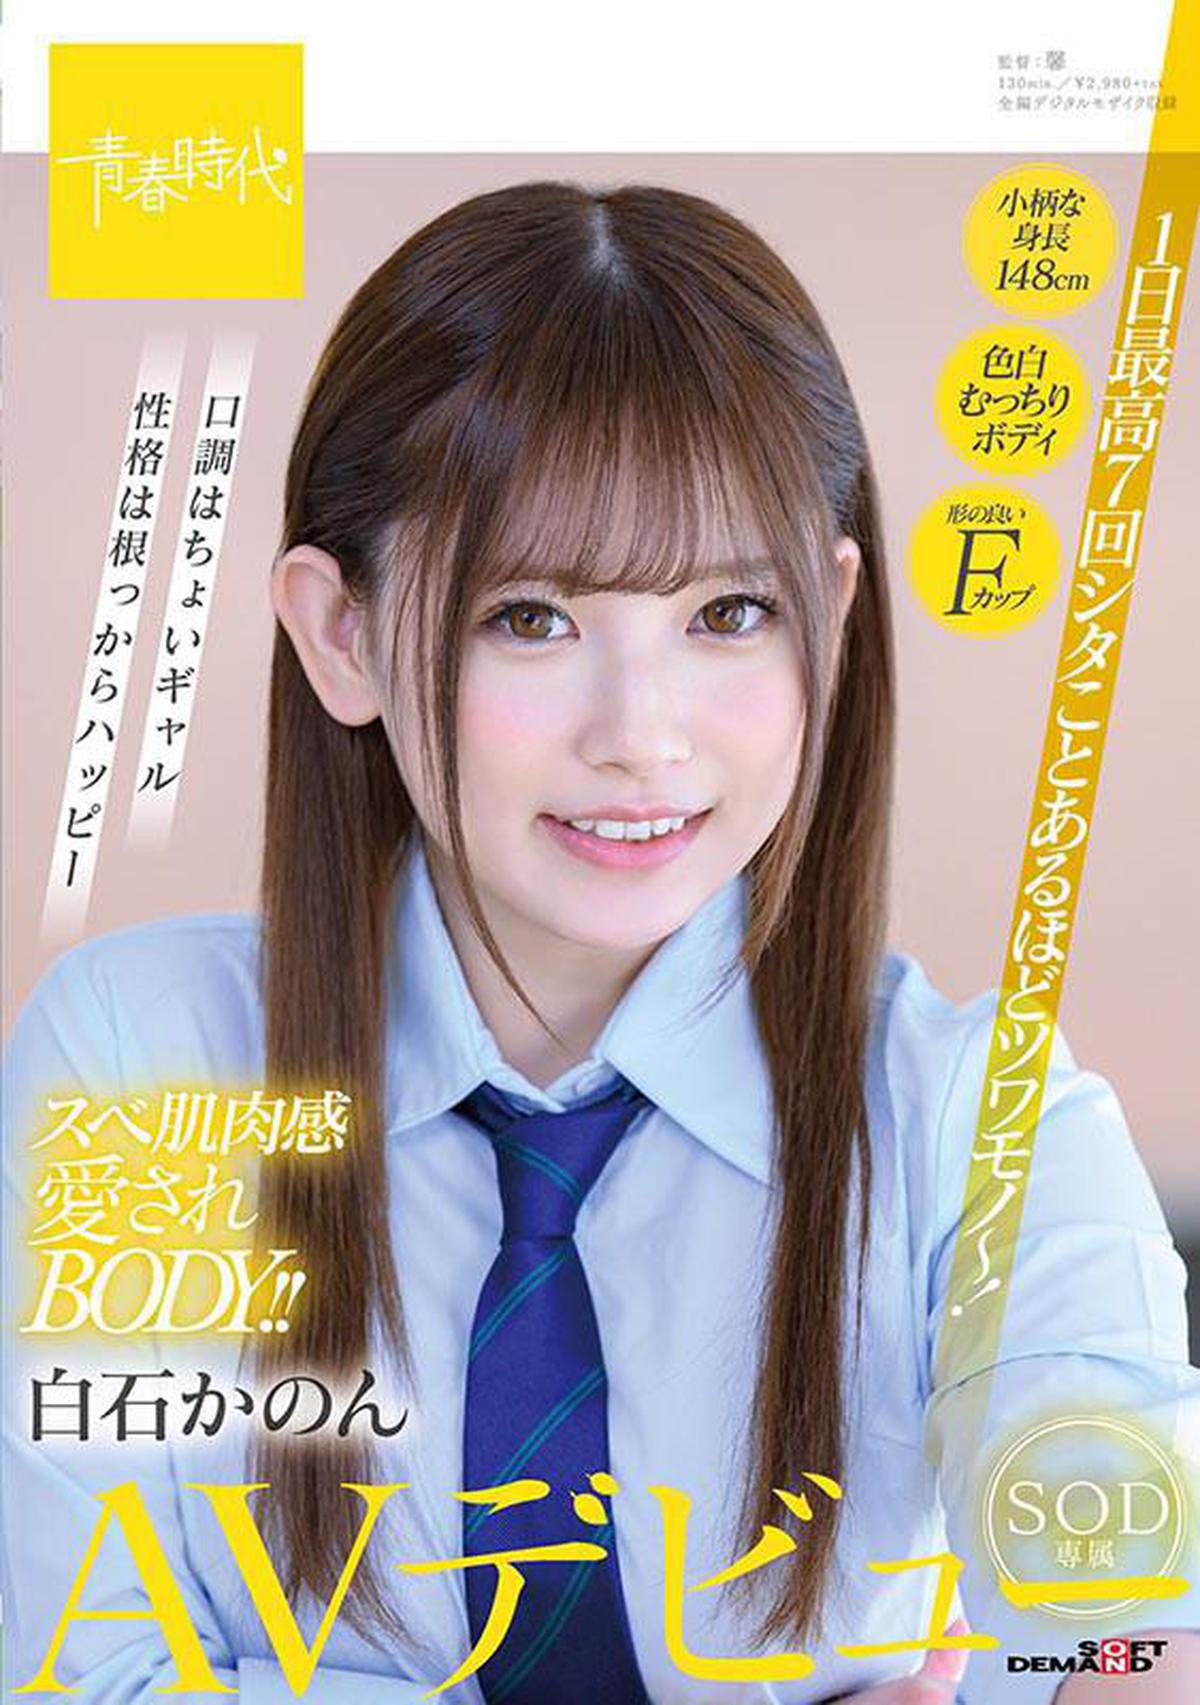 CHINASES SUB SDAB-164 Up to 7 times a day Smooth skin flesh loved BODY! !! Kanon Shiraishi SOD Exclusive AV Debut